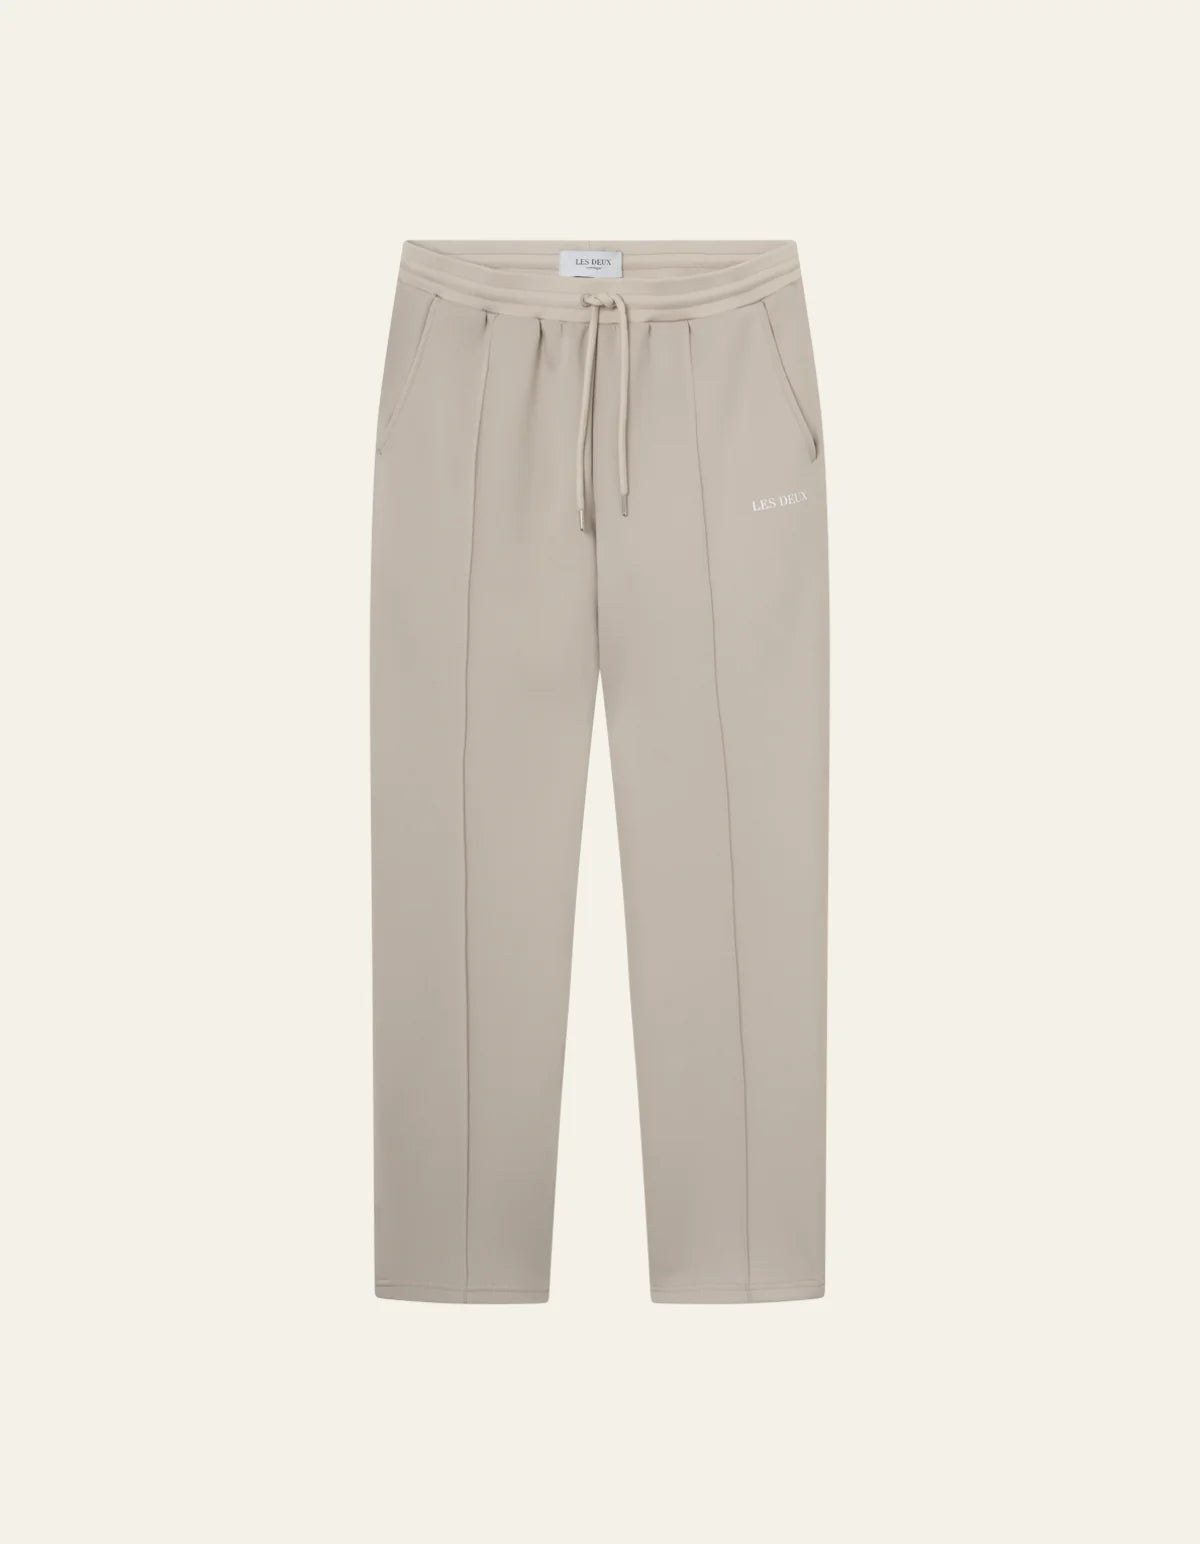 BALLIER CASUAL TRACK PANTS